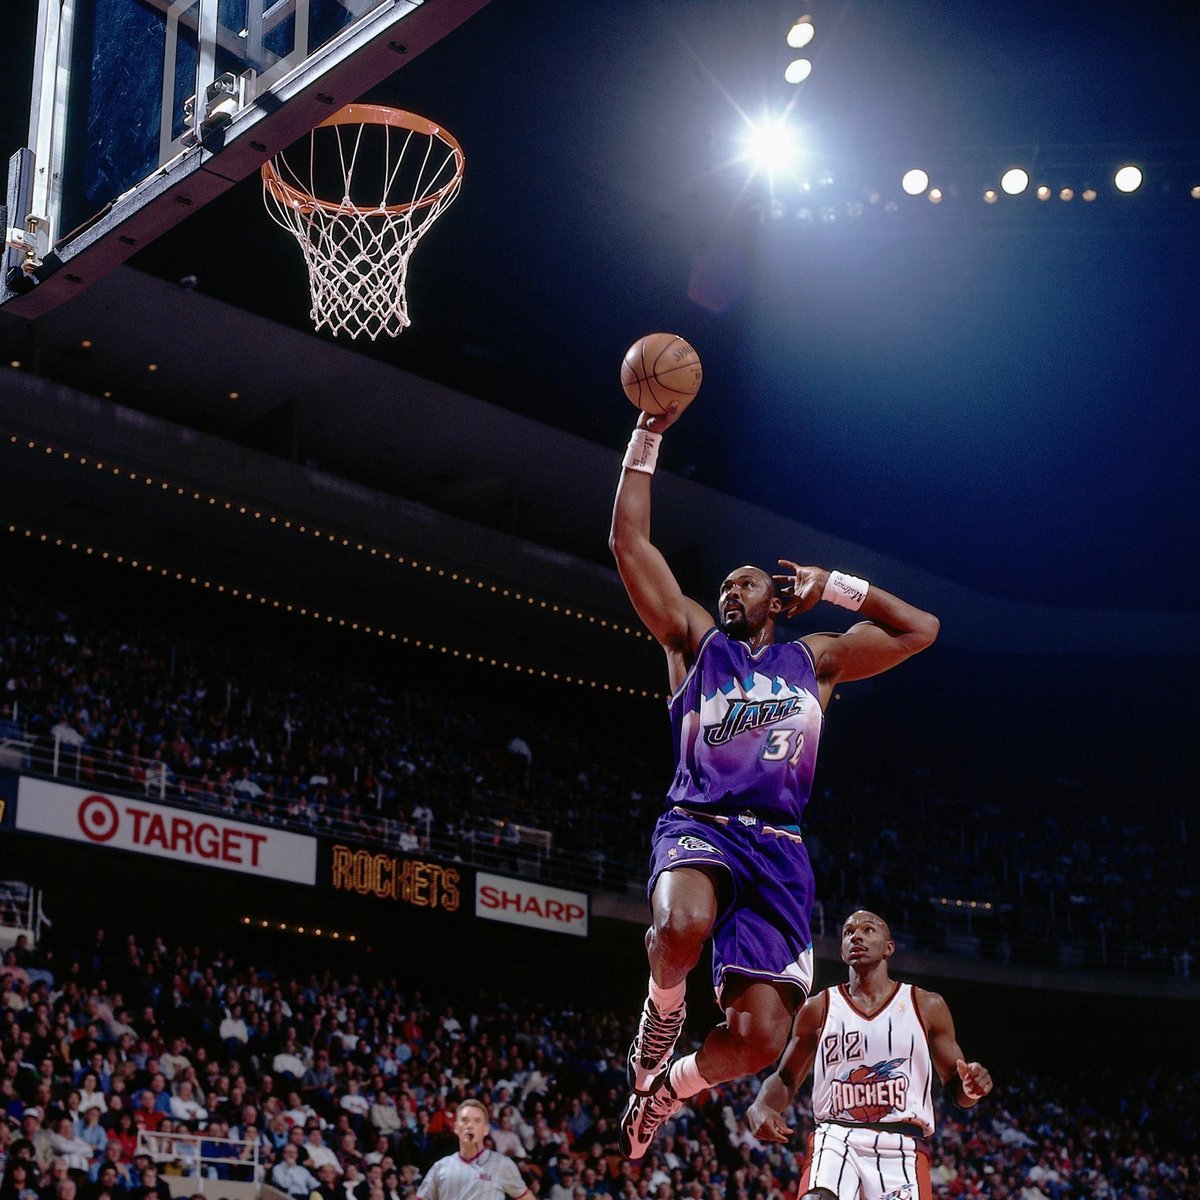 Happy Birthday to Karl Malone #3 All-time in Points 14x All-Star 14x All-NBA 2x MVP 4x All-Defense RT to wish The Mailman a Happy Birthday